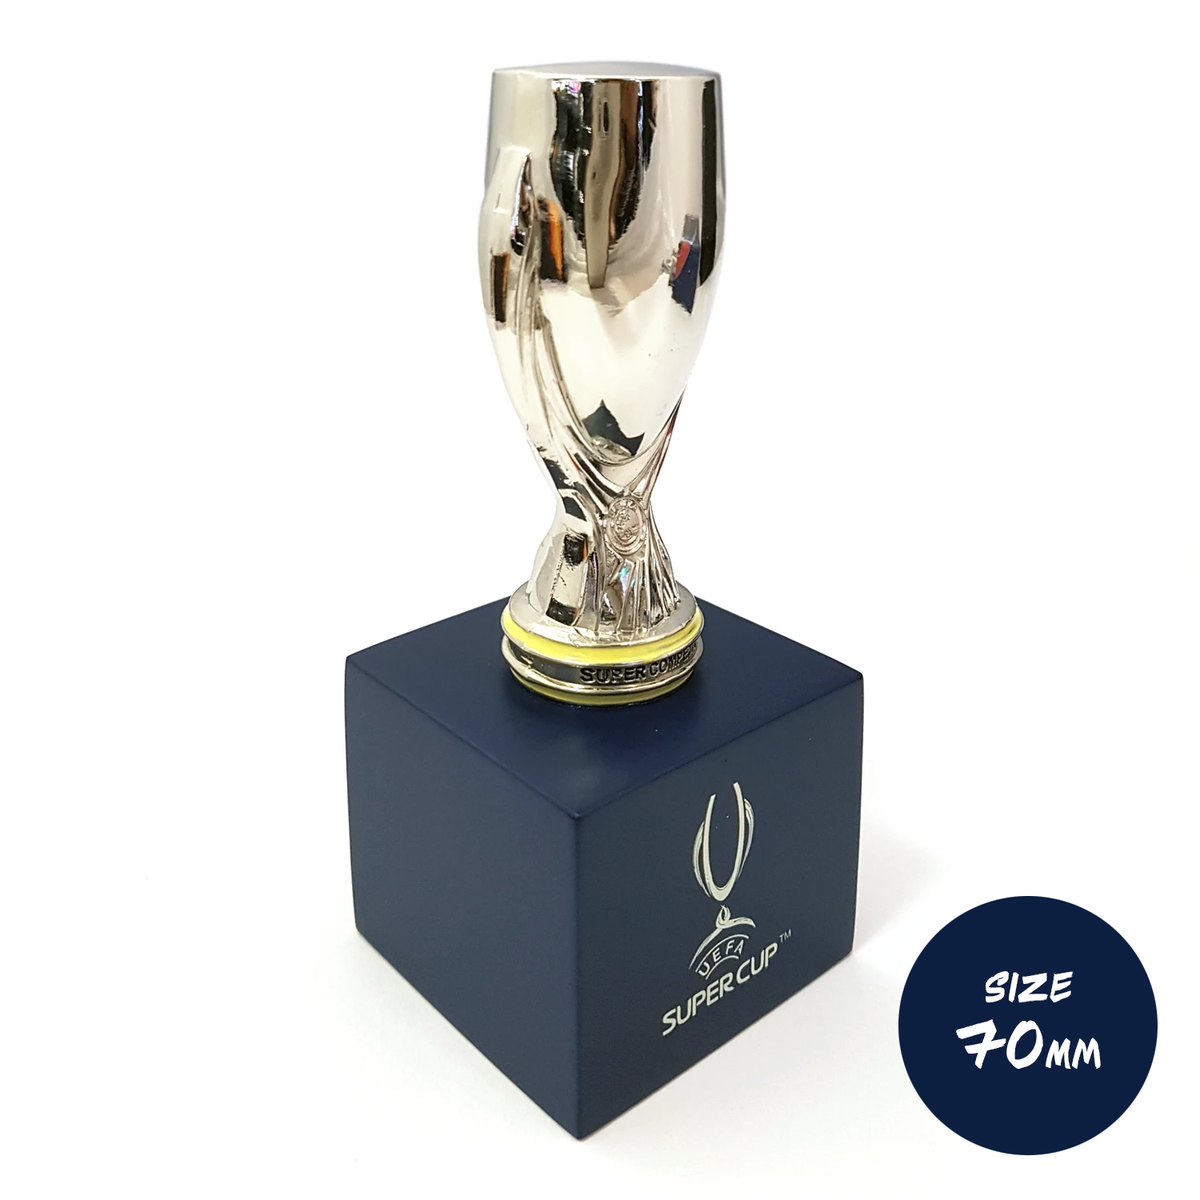 UEFA Super Cup 70mm 3D Replica Trophy with Stand UEFA Club